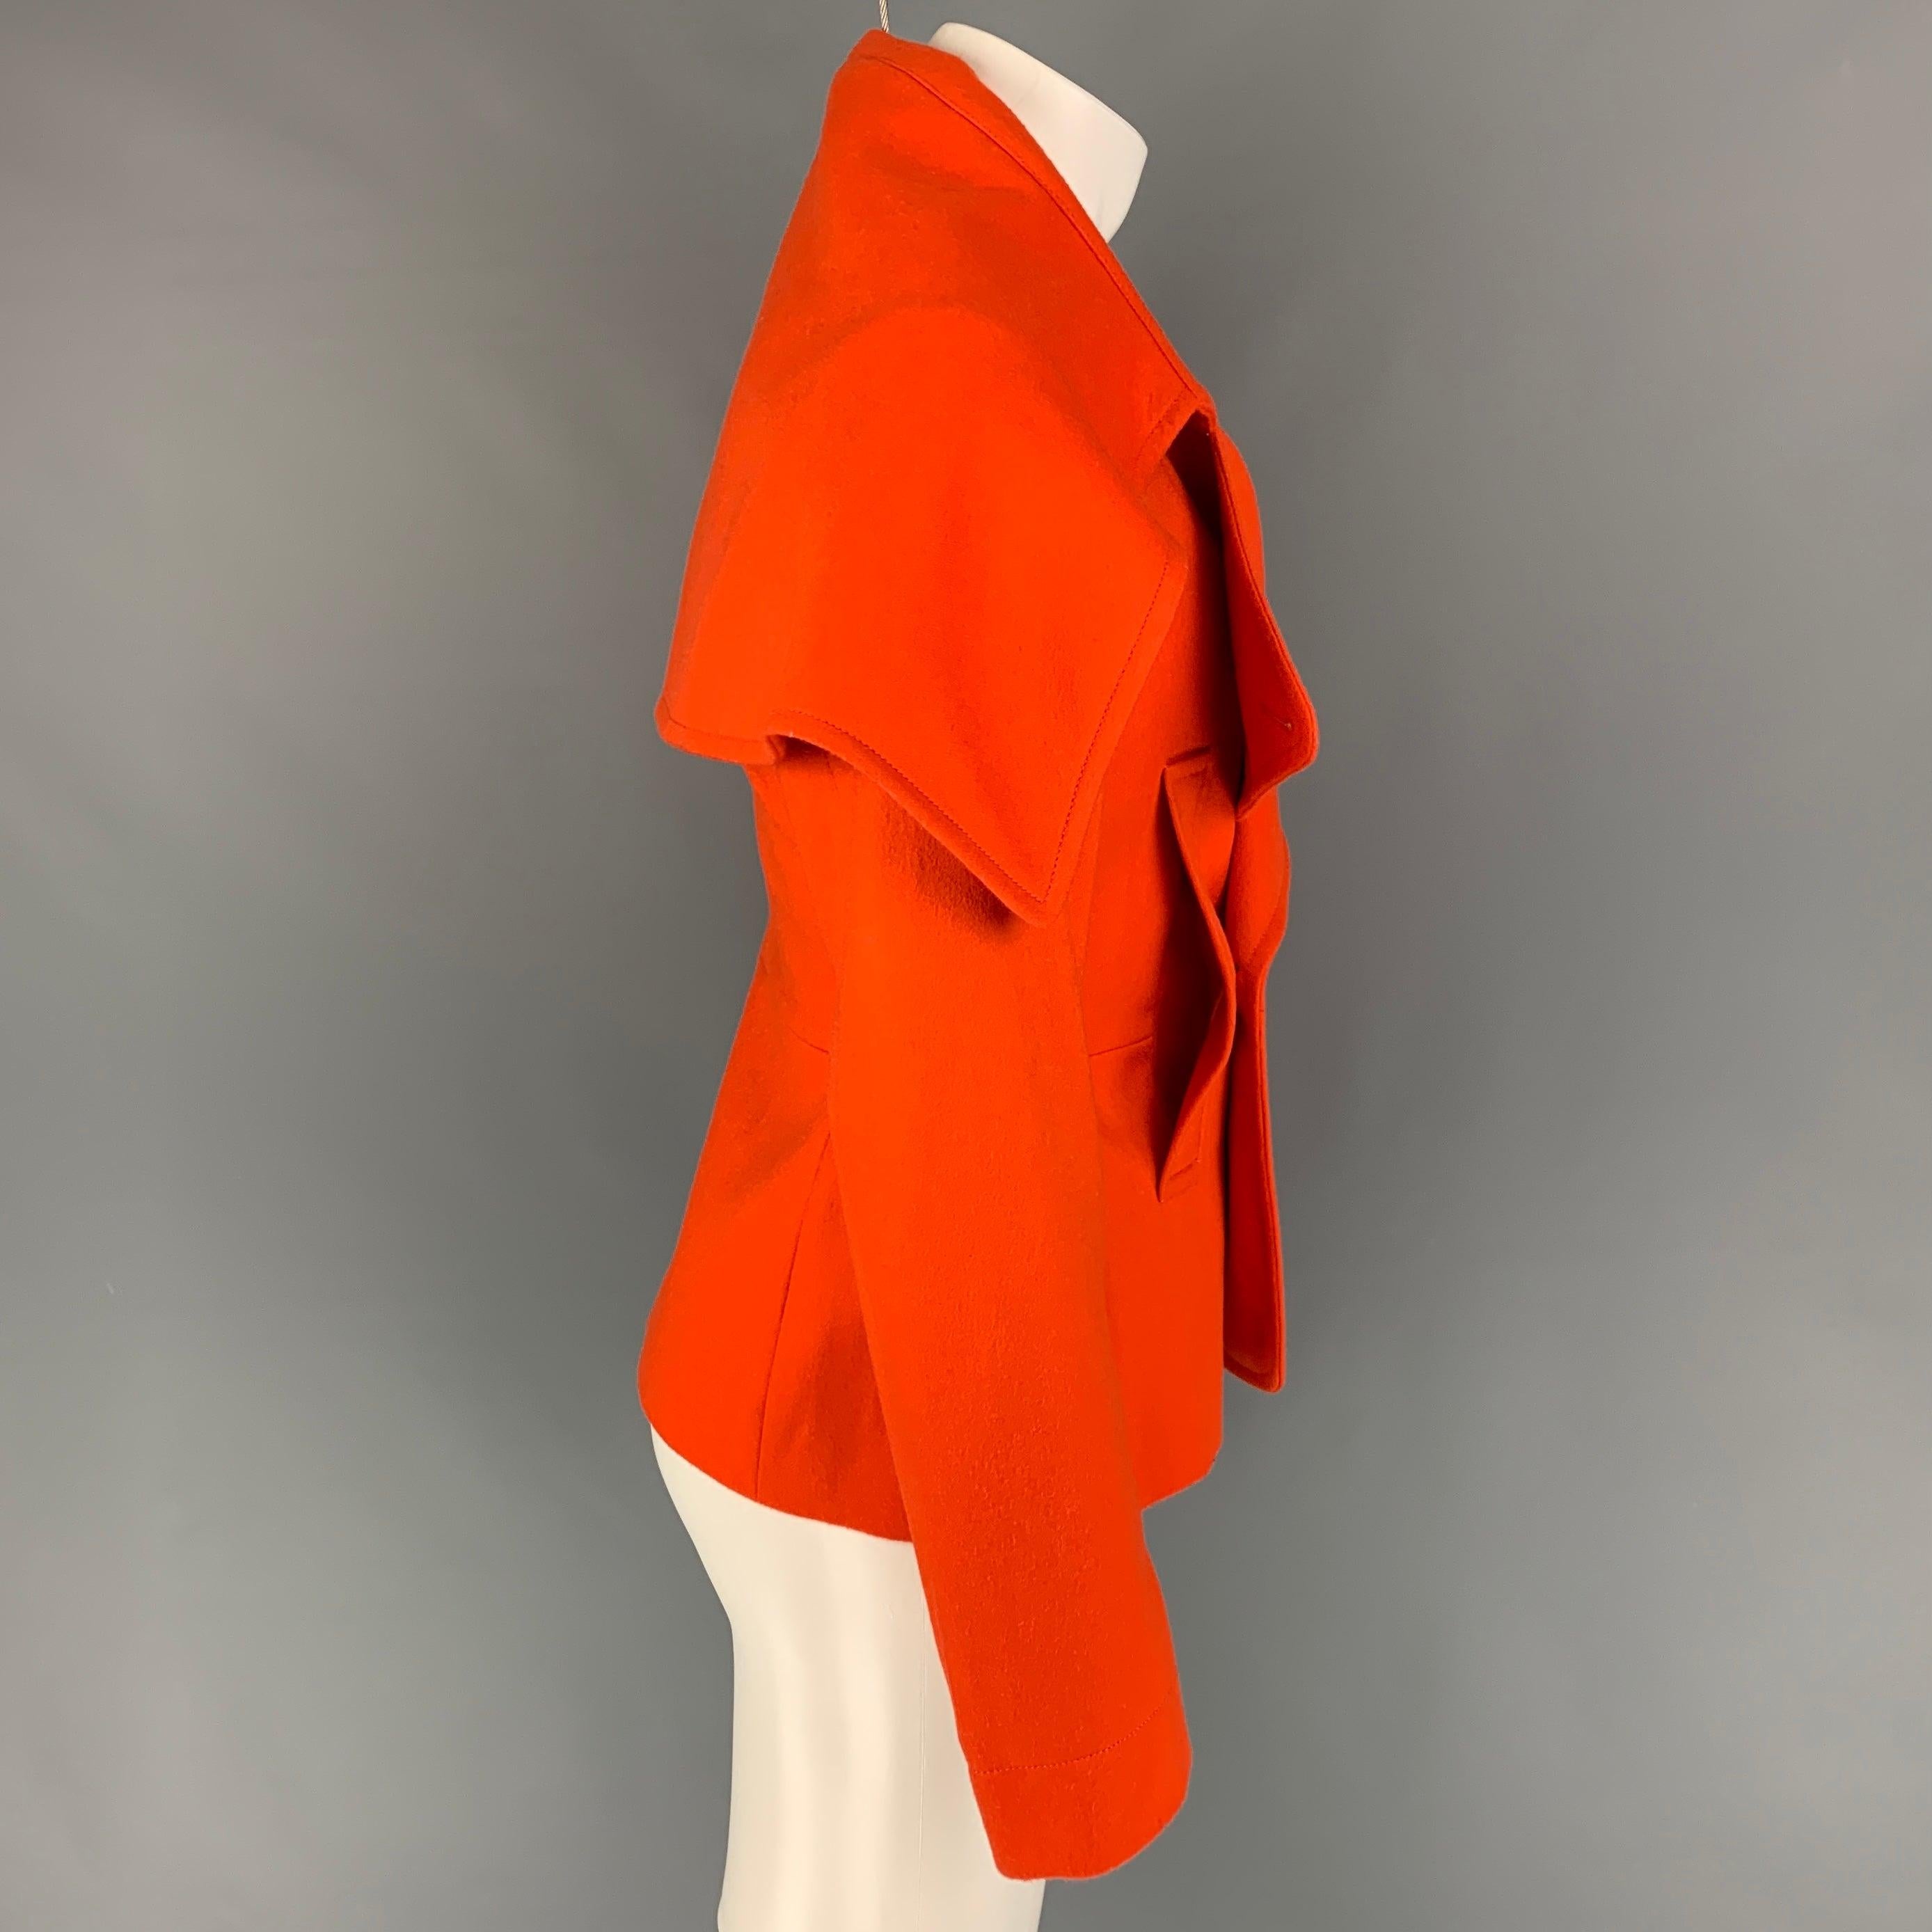 WALTER VAN BEIRENDONCK jacket comes in a orange wool with a full liner featuring a large lapel design, front pockets, and a double breasted closure.
New With Tags.
 

Marked:   46 

Measurements: 
 
Shoulder: 16 inches  Chest: 36 inches  Sleeve: